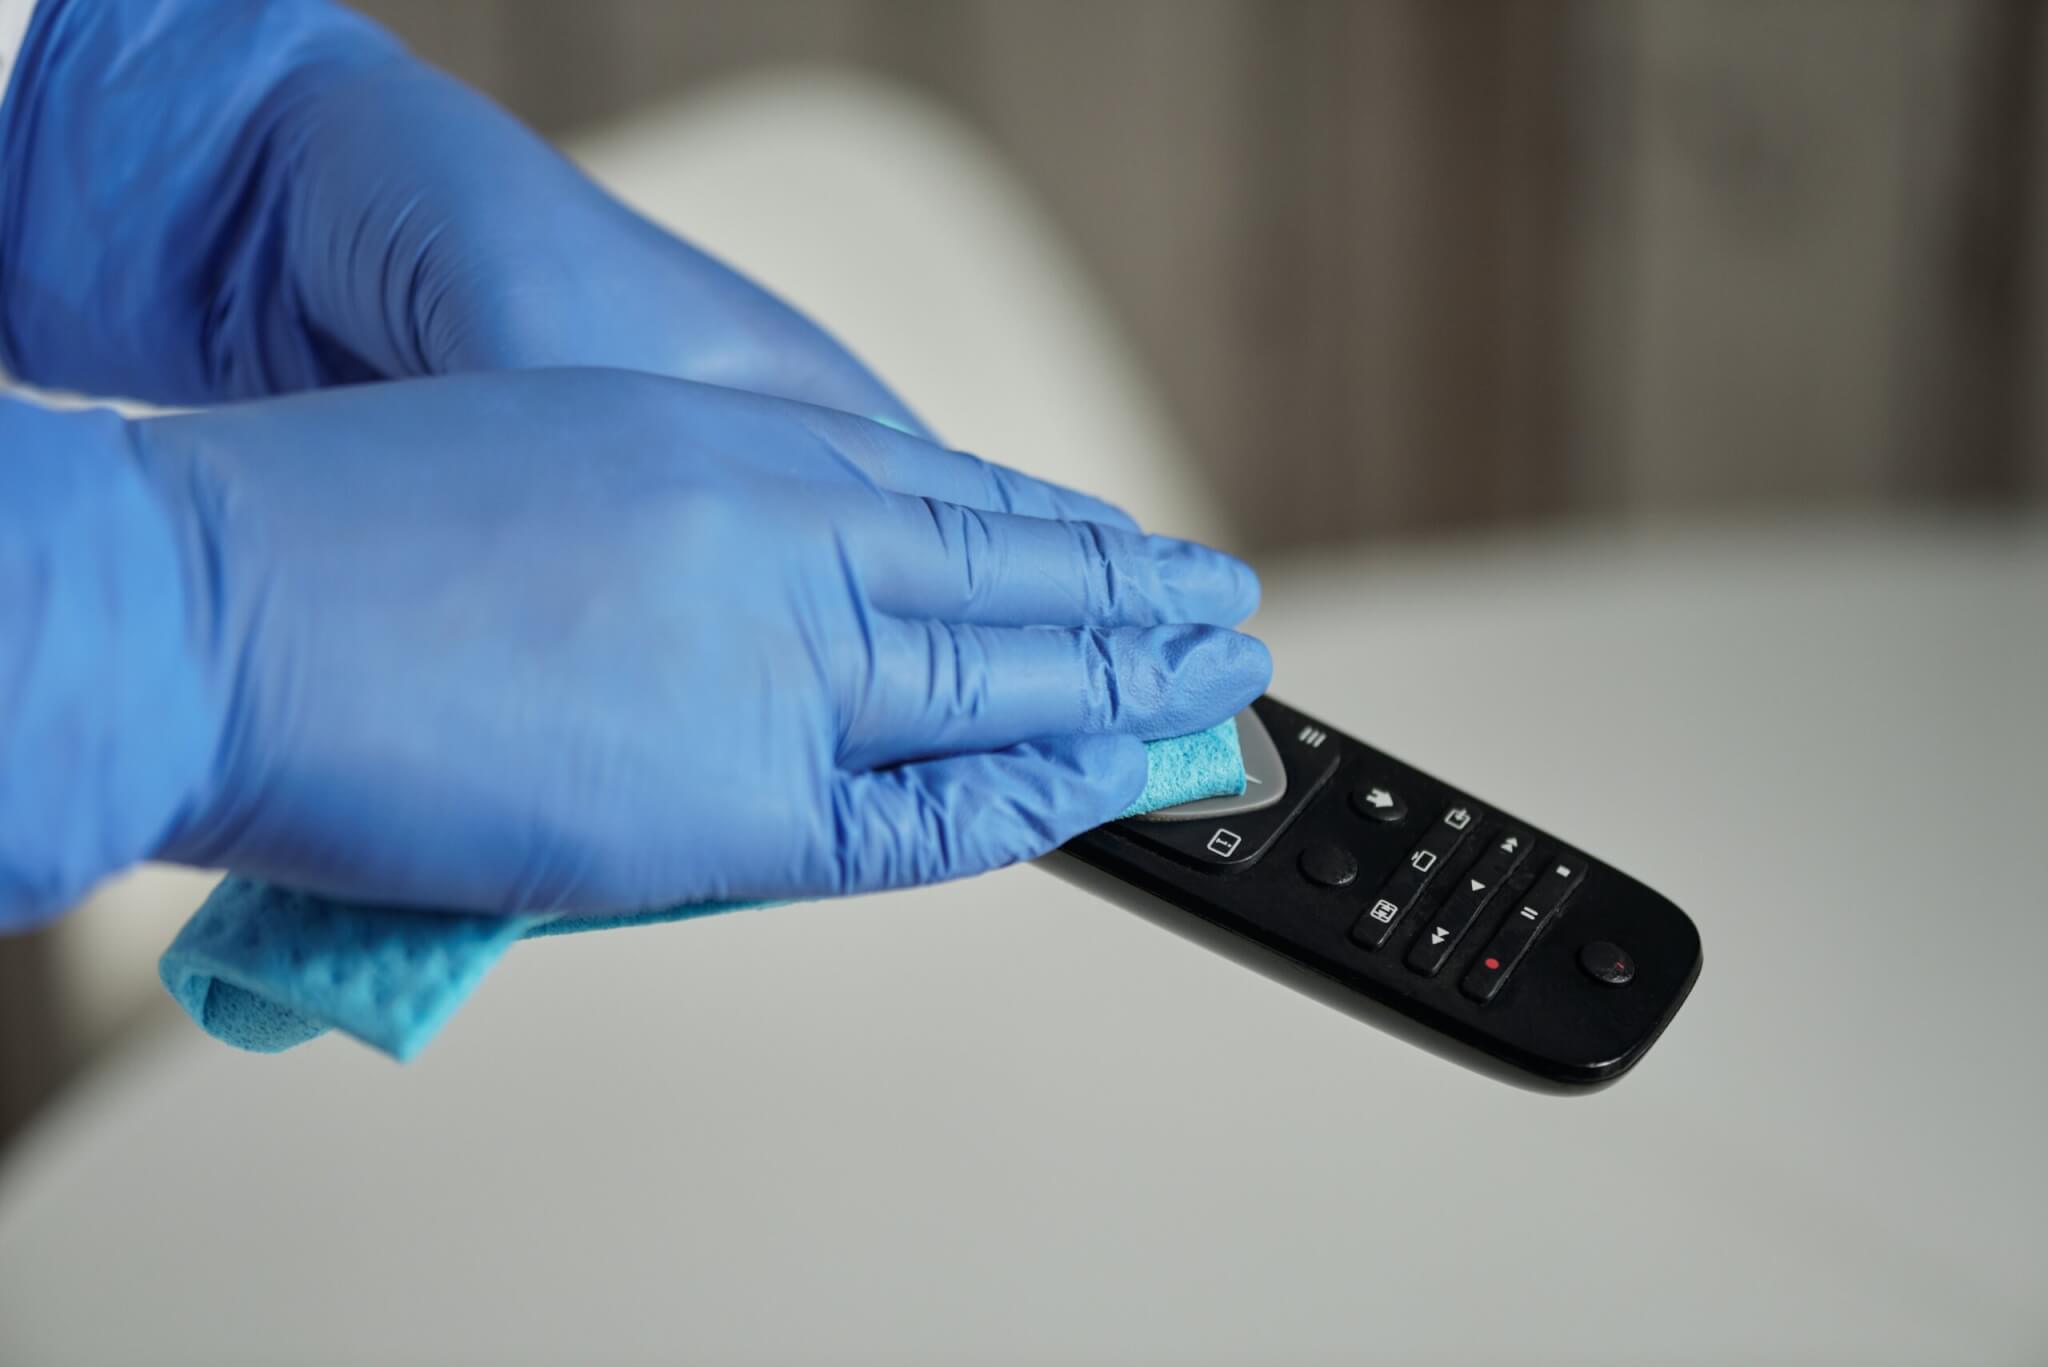 Remote control being cleaned